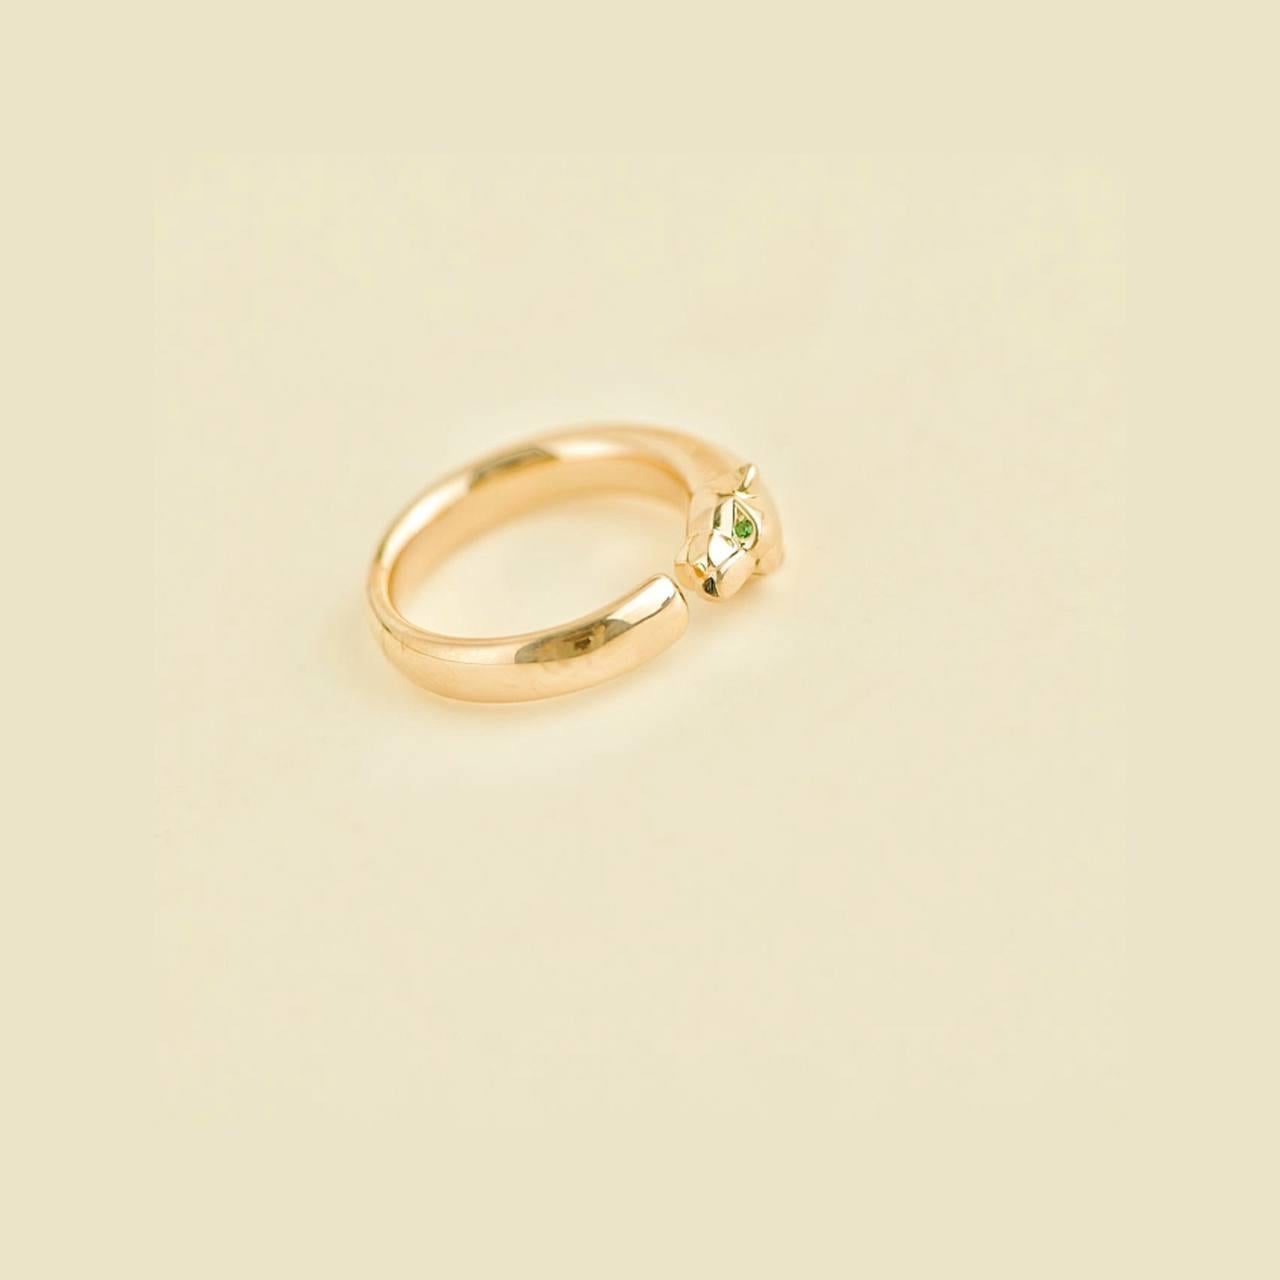 Cartier Panthère de Cartier Yellow Gold Ring Size 56 In Excellent Condition For Sale In Banbury, GB